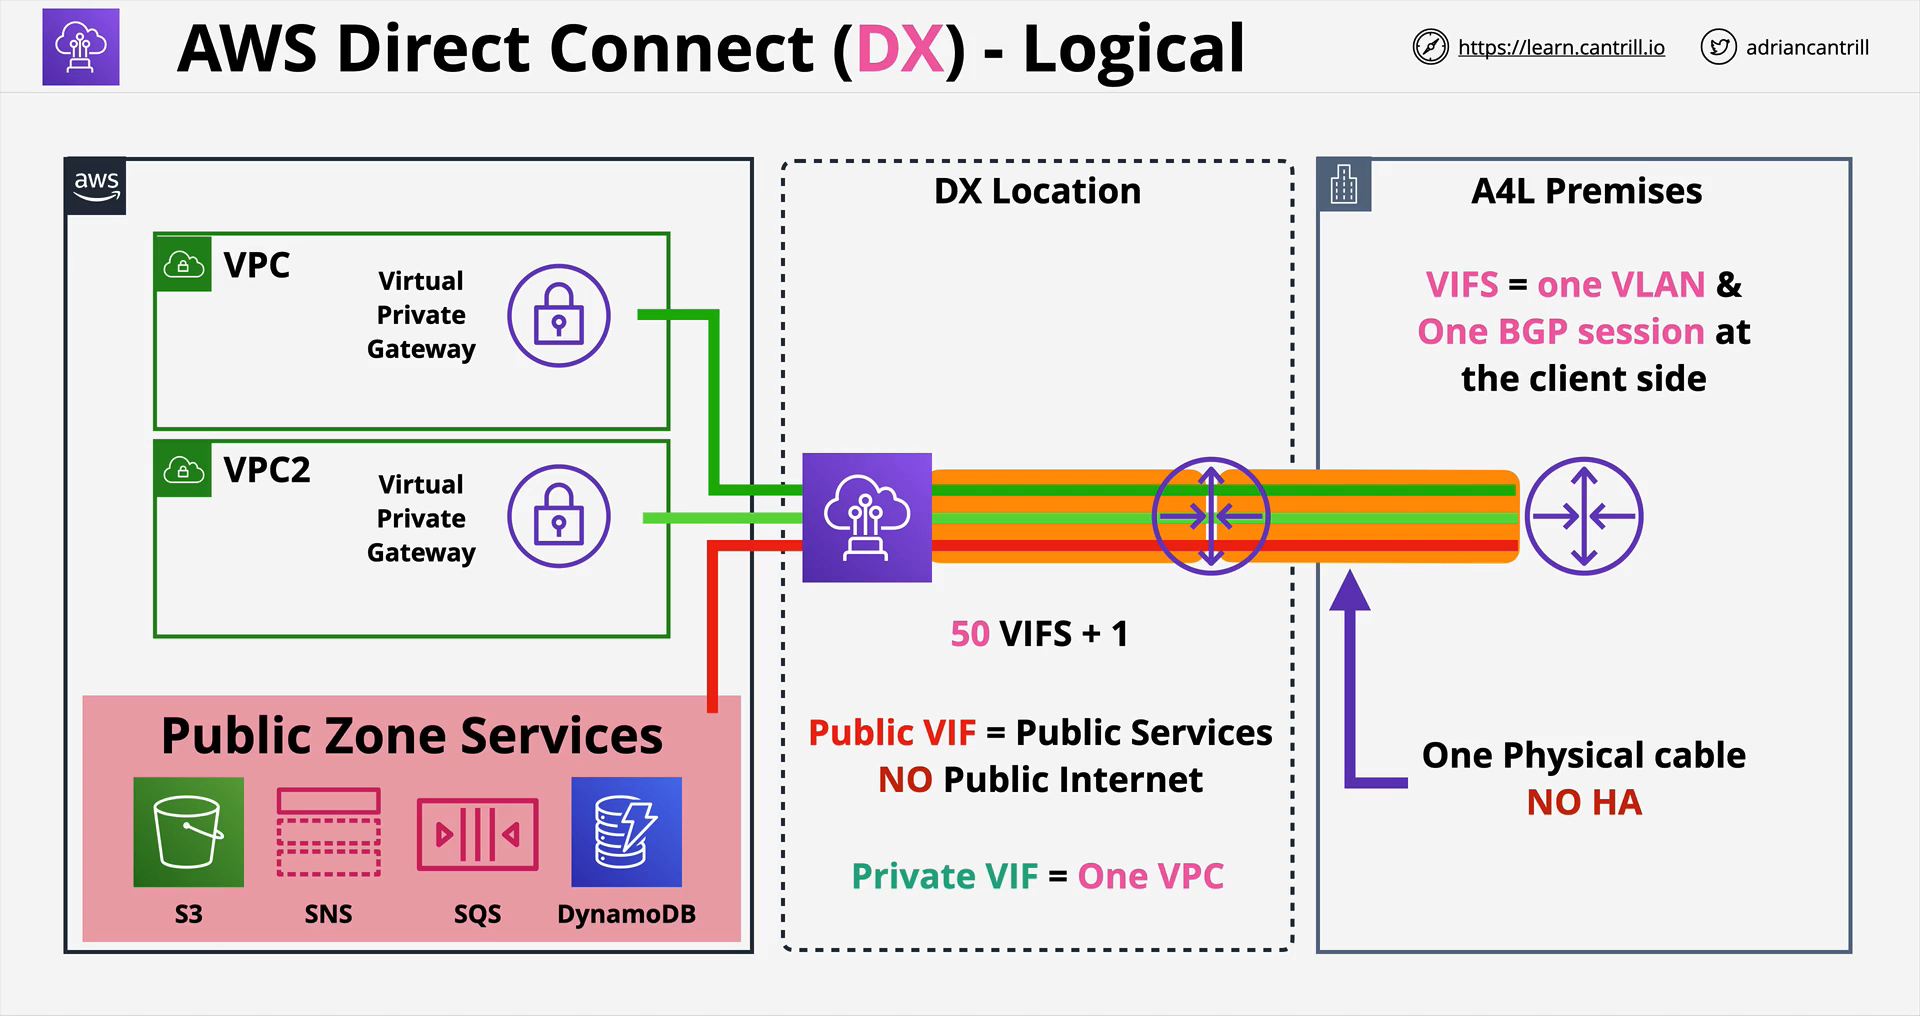 AWS Direct Connect (DX) - Logical